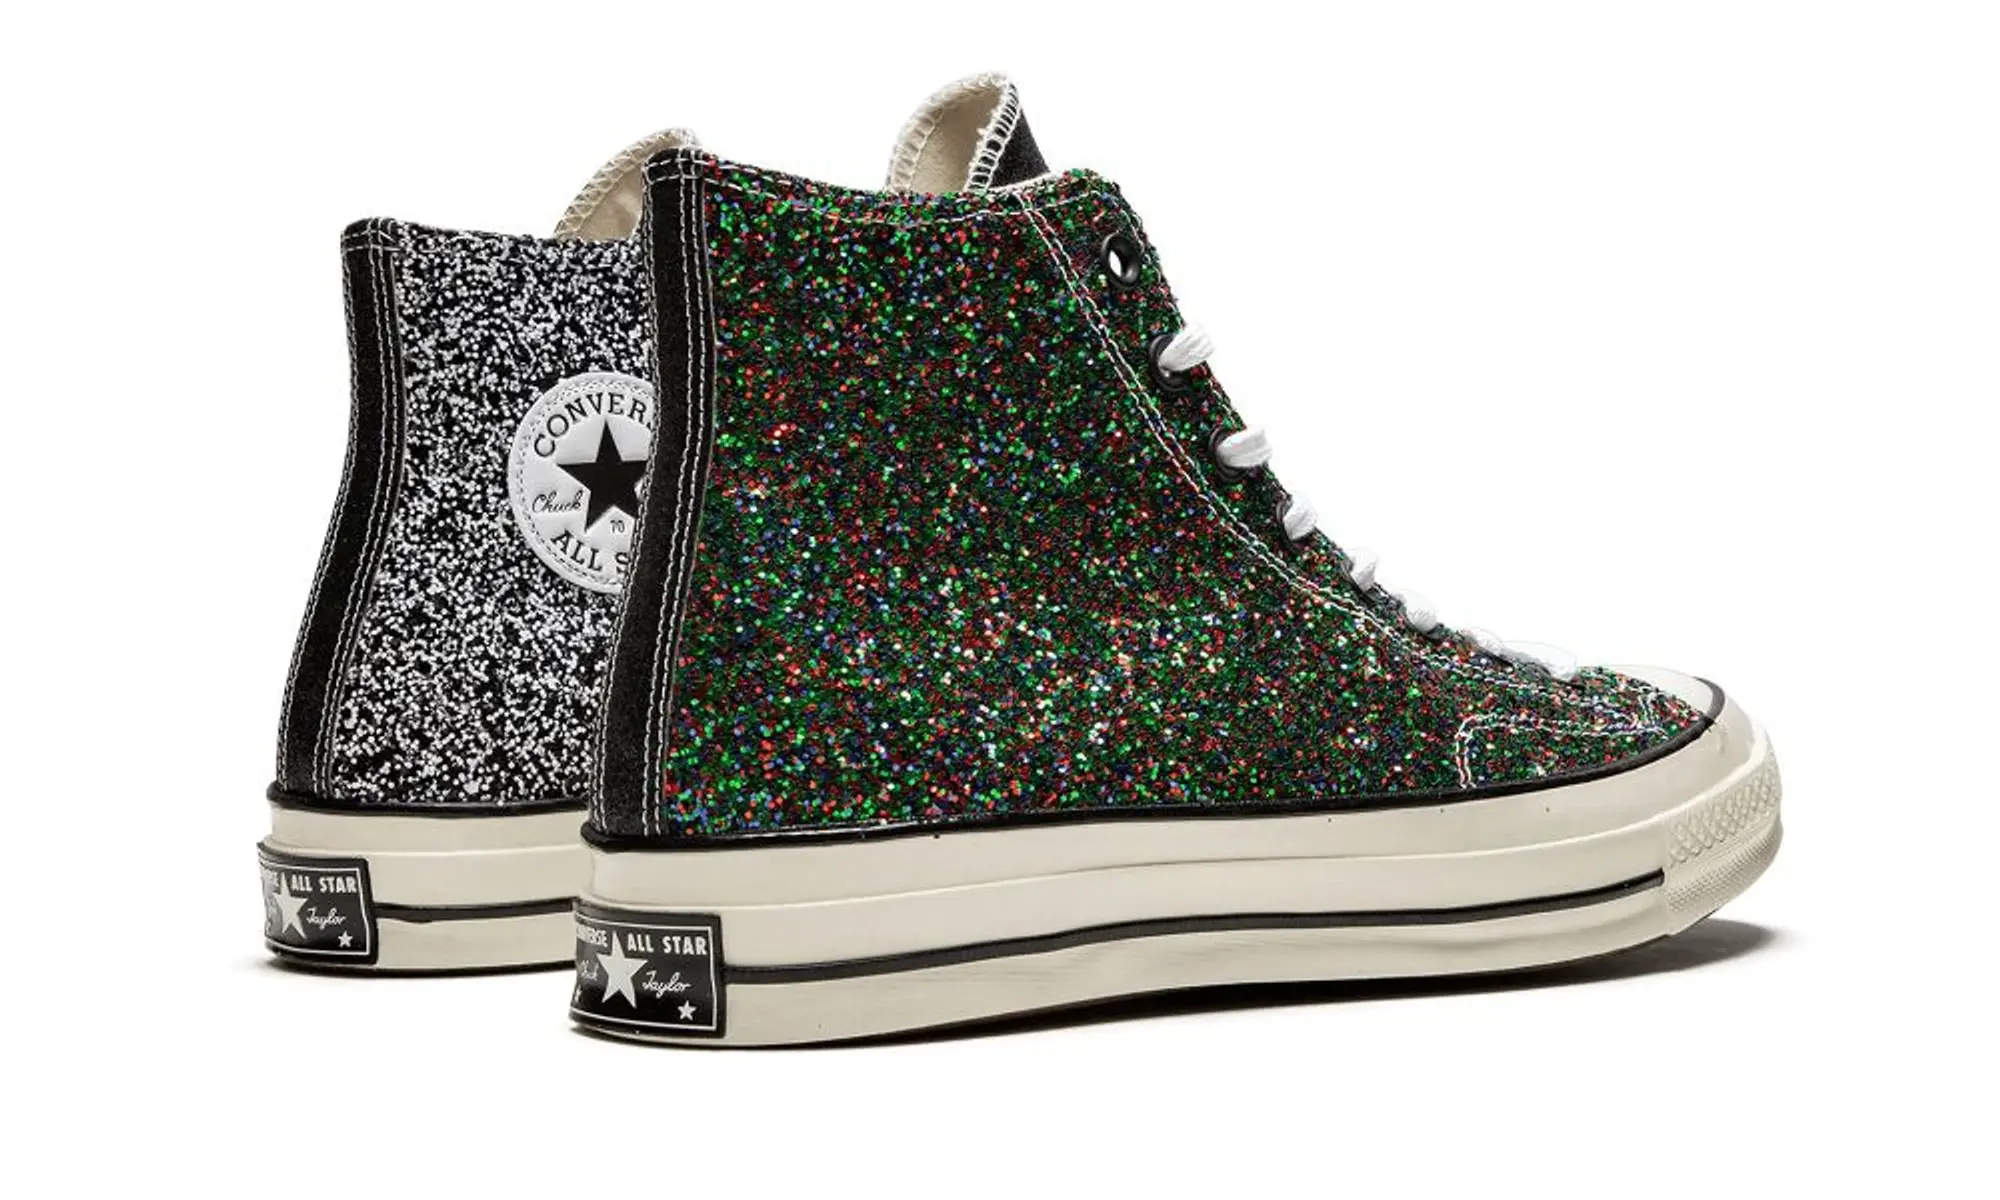 Converse x JW Anderson Chuck 70 Hi JW Anderson - Glitter Pack Shoes